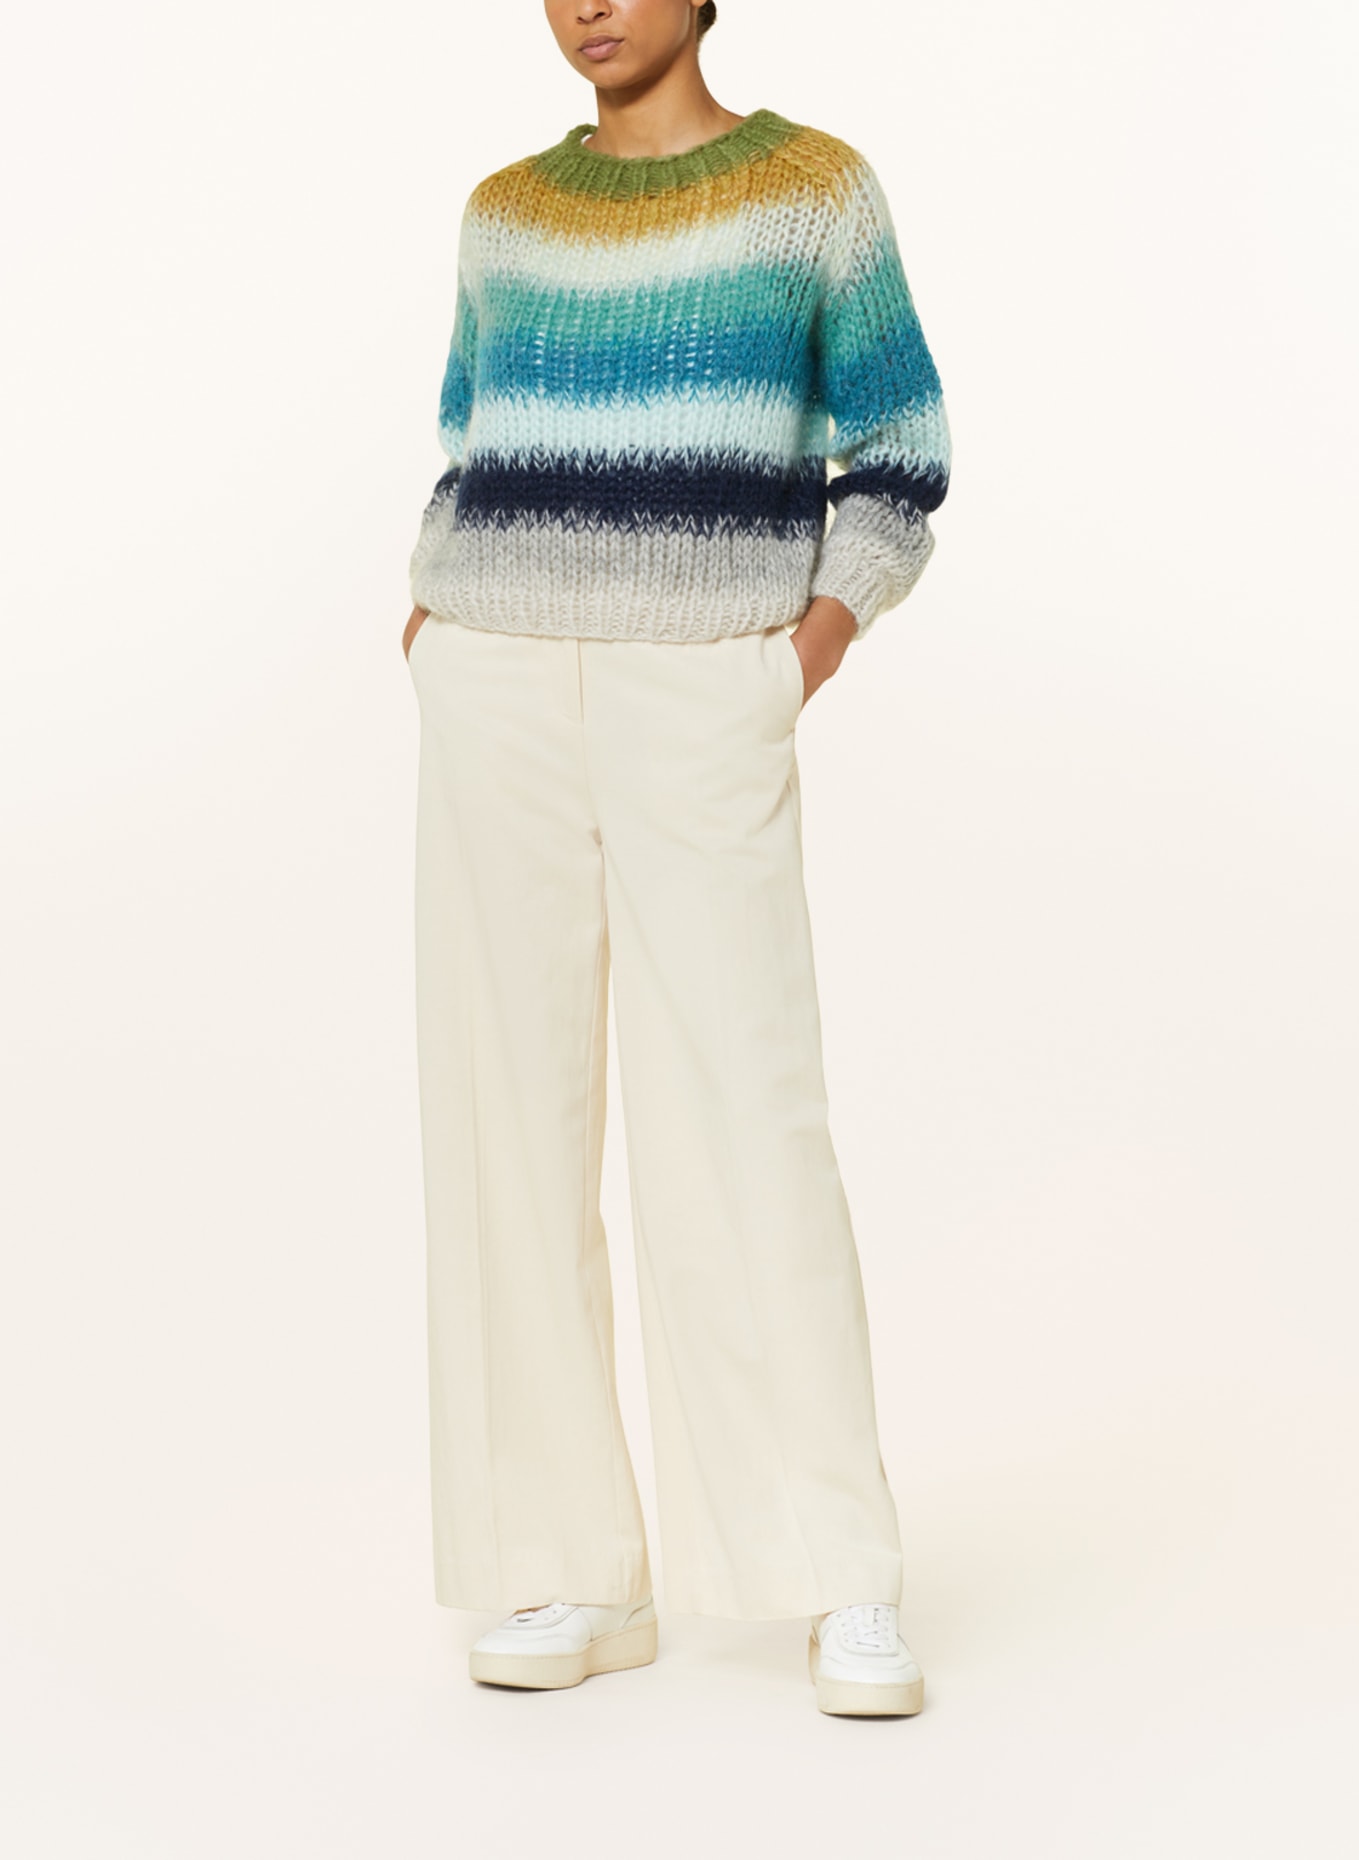 MAIAMI Sweater with mohair, Color: GREEN/ BLUE/ GRAY (Image 2)